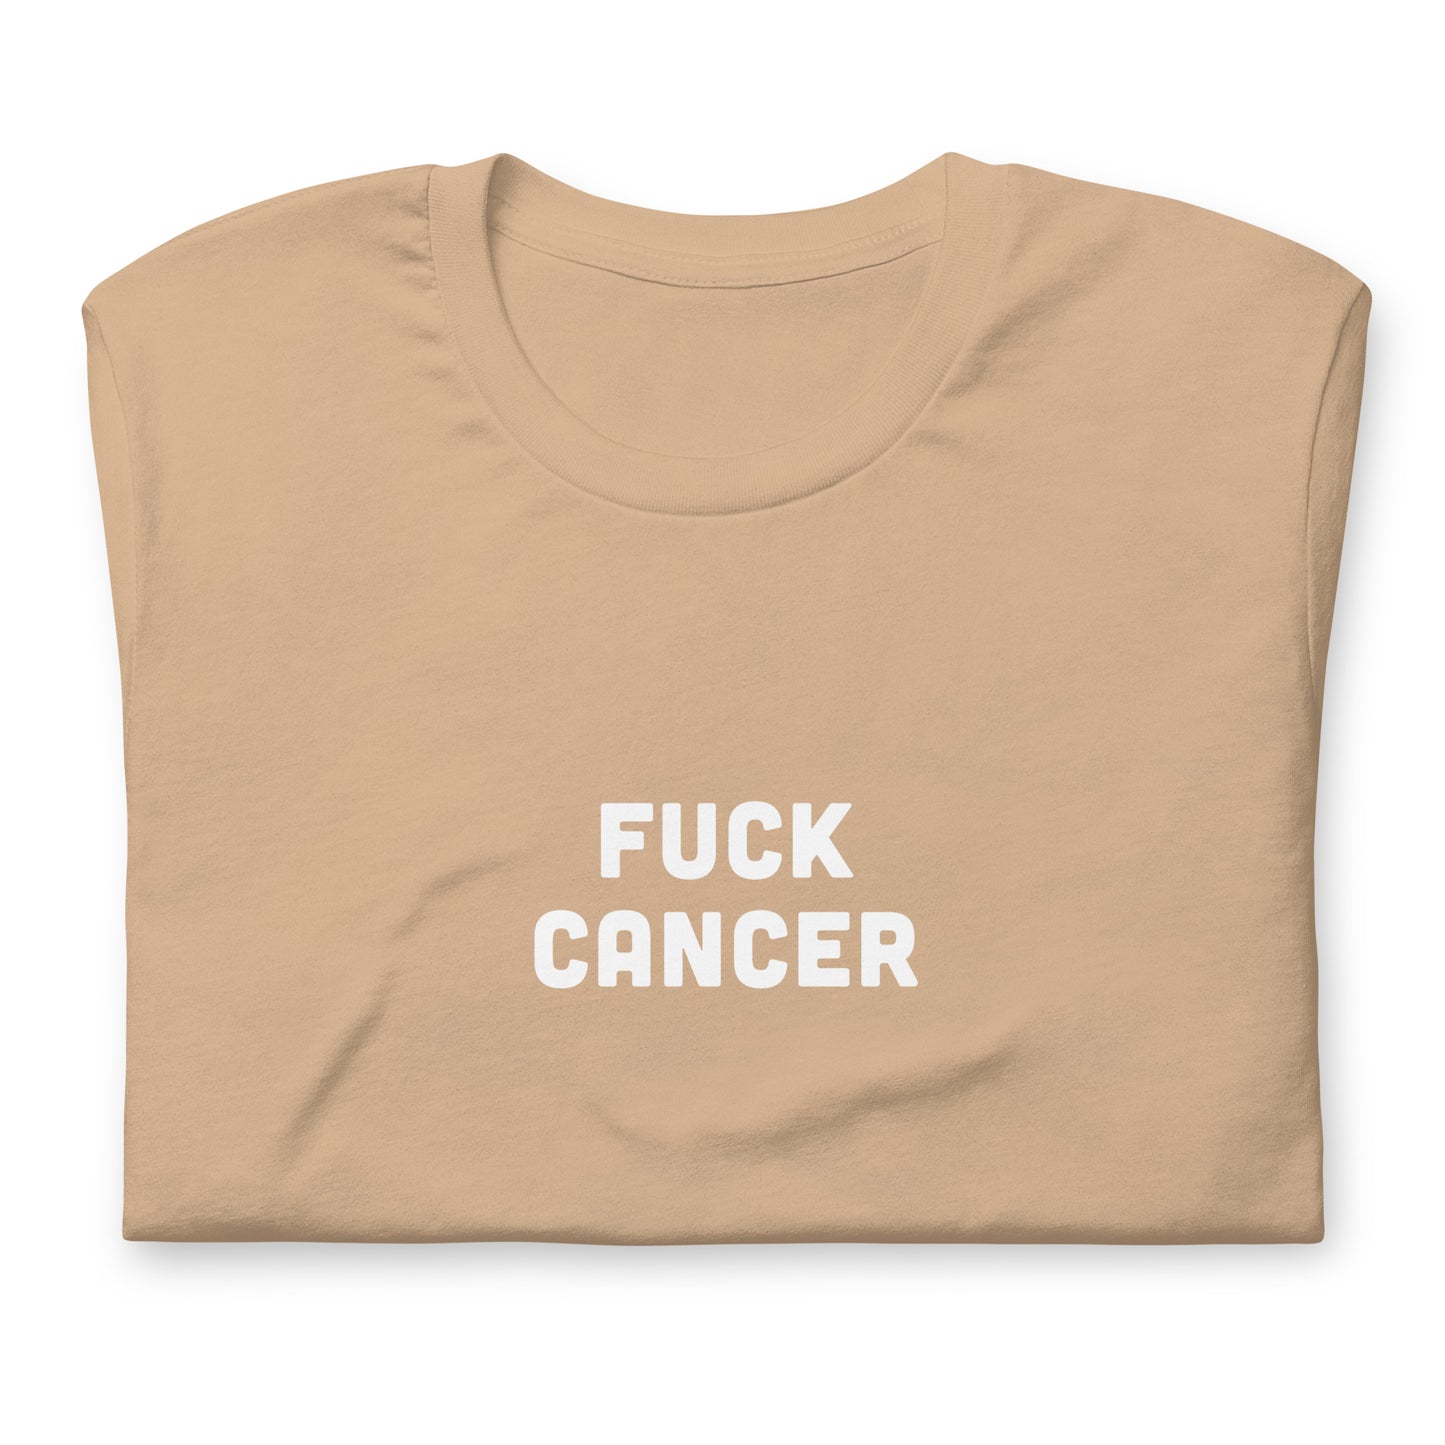 Fuck Cancer T-Shirt Size XL Color Forest